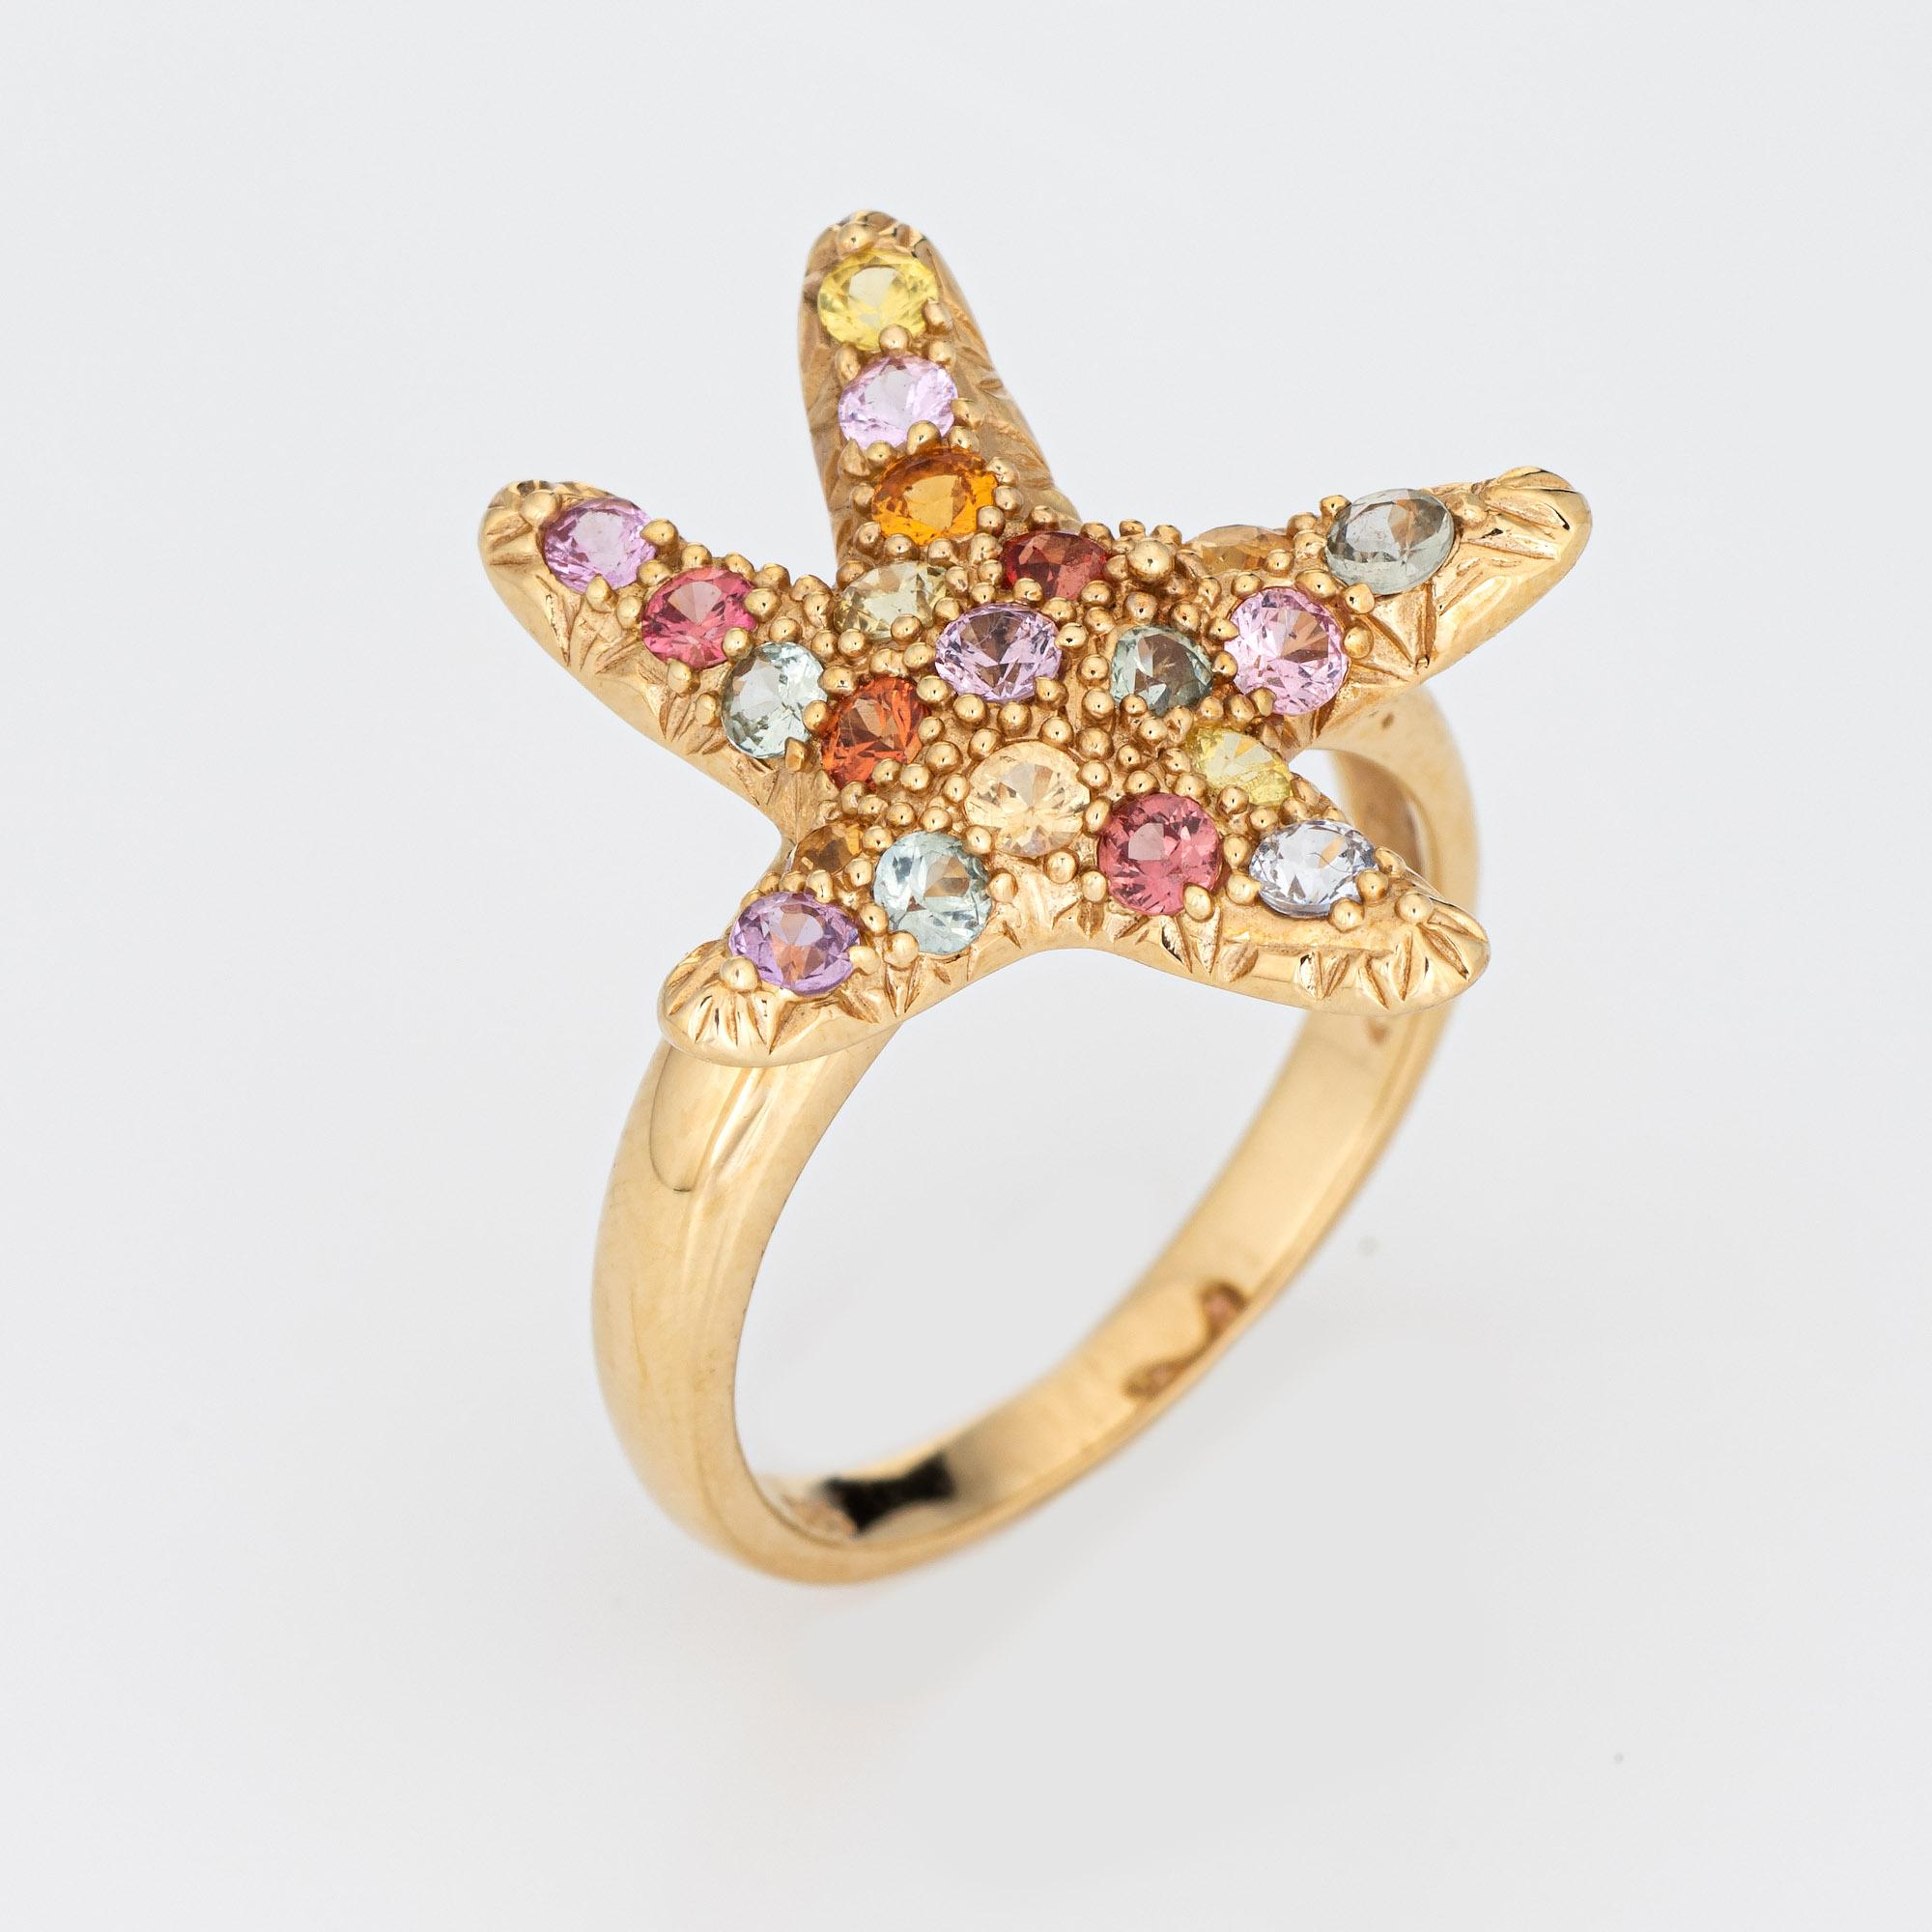 Stylish vintage multi-colored sapphire starfish ring crafted in 14 karat yellow gold. 

Multi-colored sapphires (green, yellow, orange & pink) total an estimated 0.65 carats. 

The colorful sapphires are set into the ornate starfish mount. The